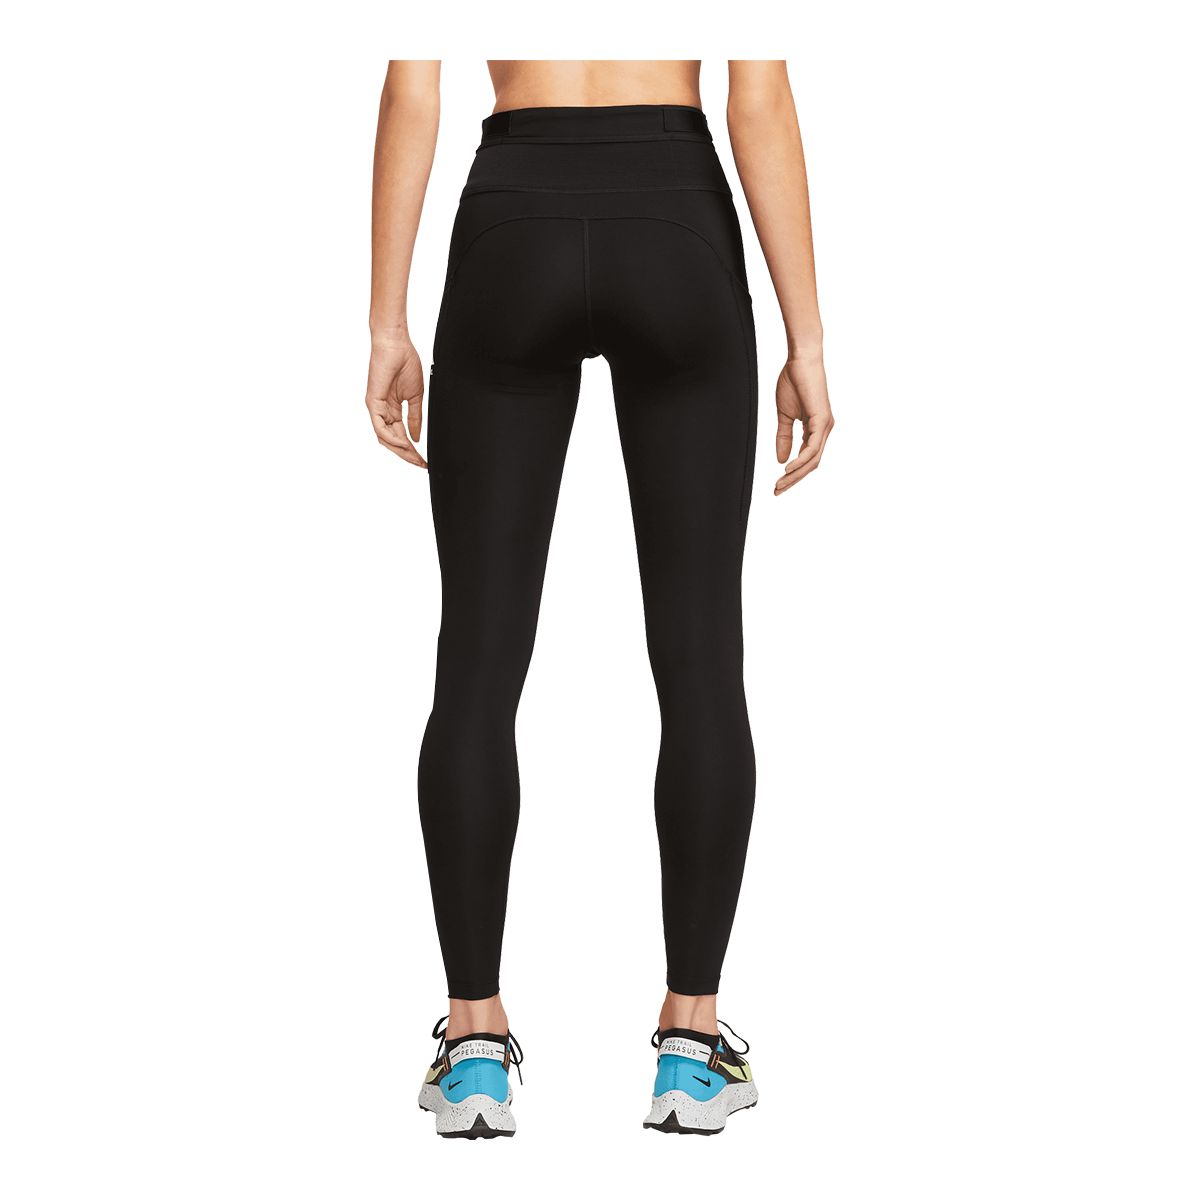 Nike Women's Epic Luxe Running Leggings with Pockets in Black - ShopStyle  Pants